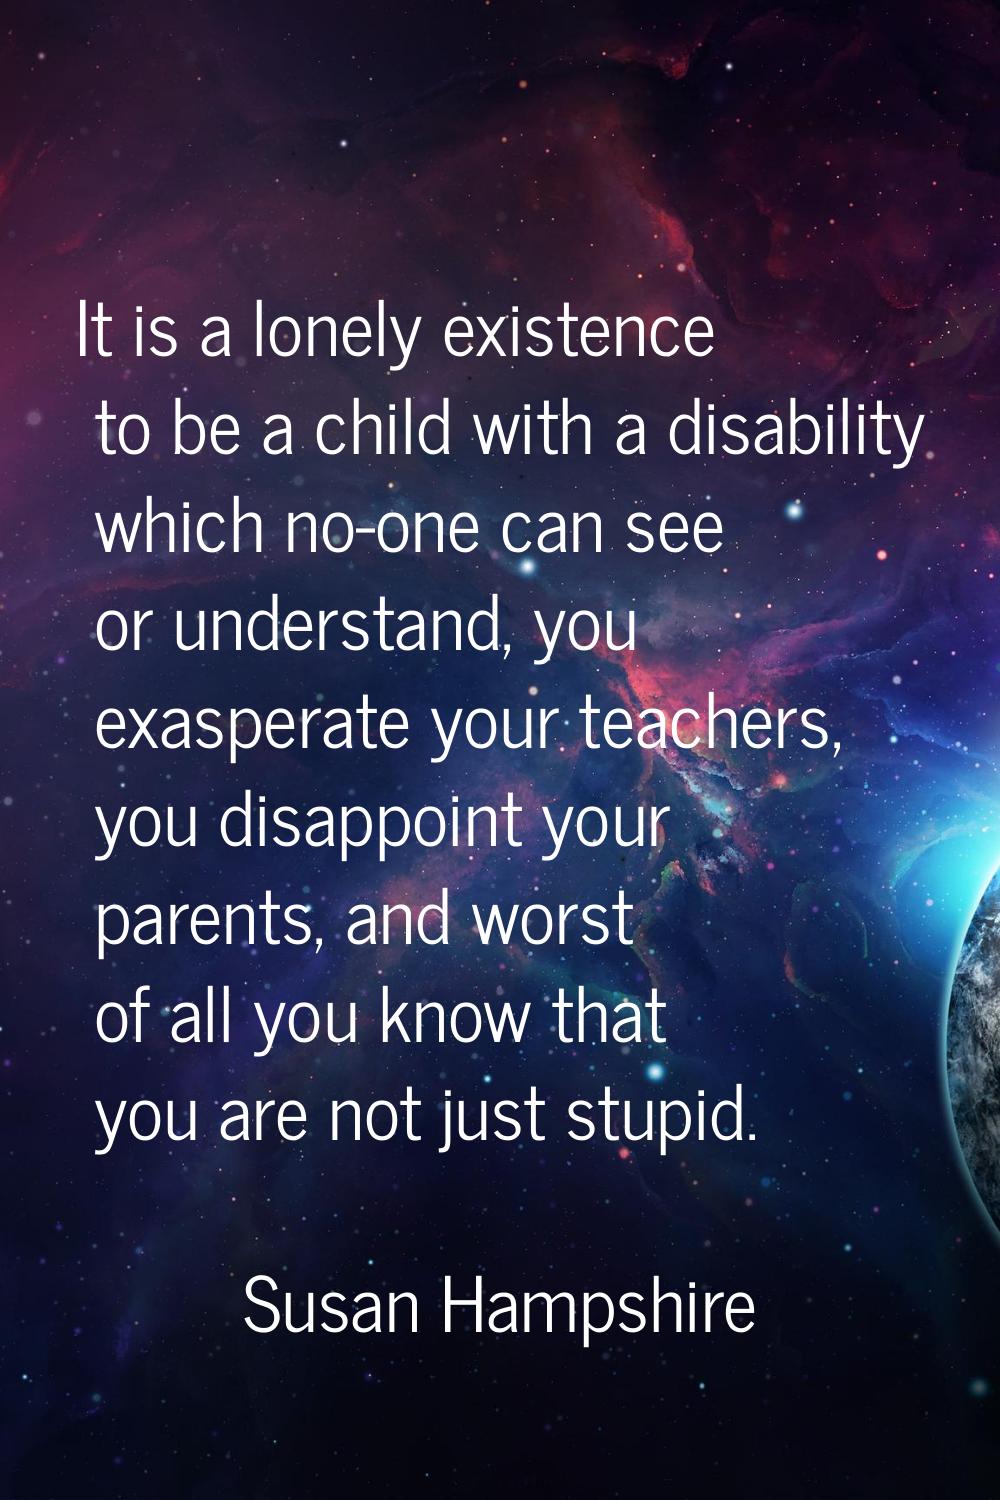 It is a lonely existence to be a child with a disability which no-one can see or understand, you ex